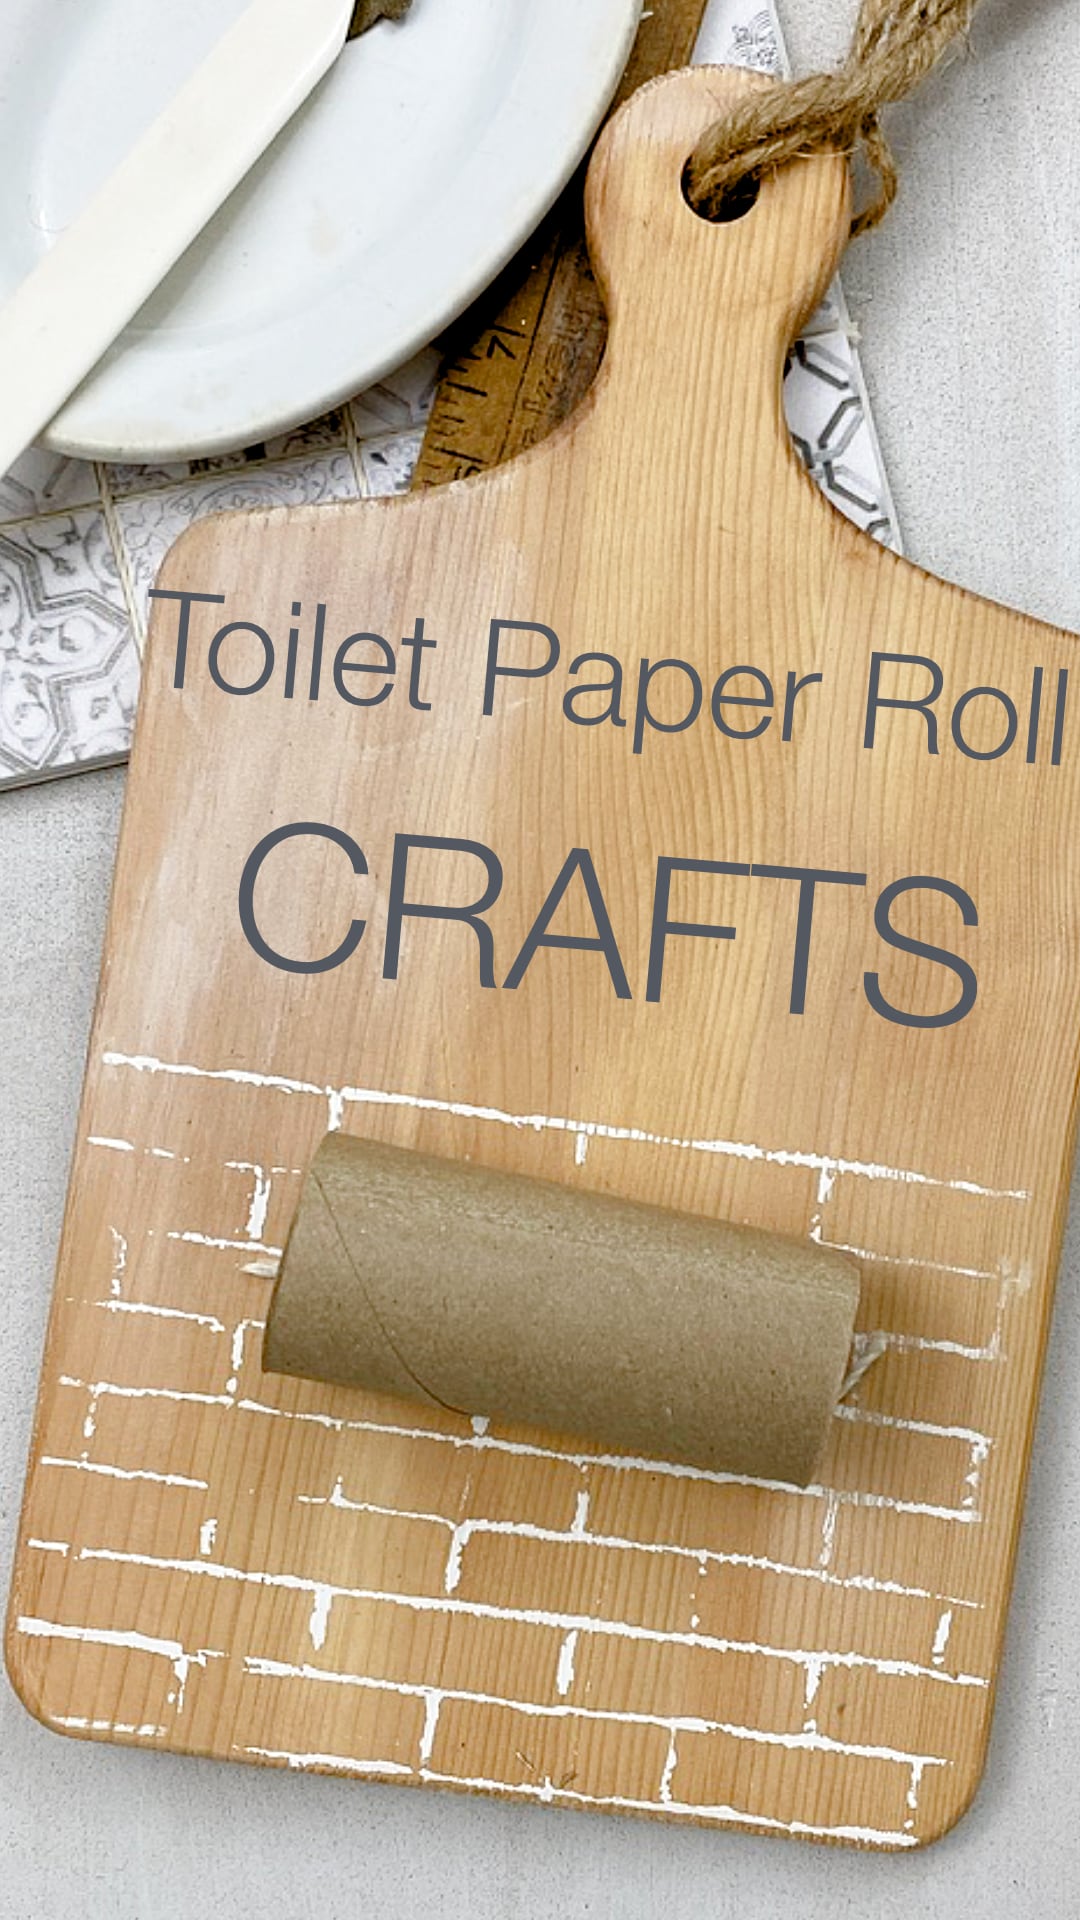 Toilet Paper Roll Crafts for All Skill Levels